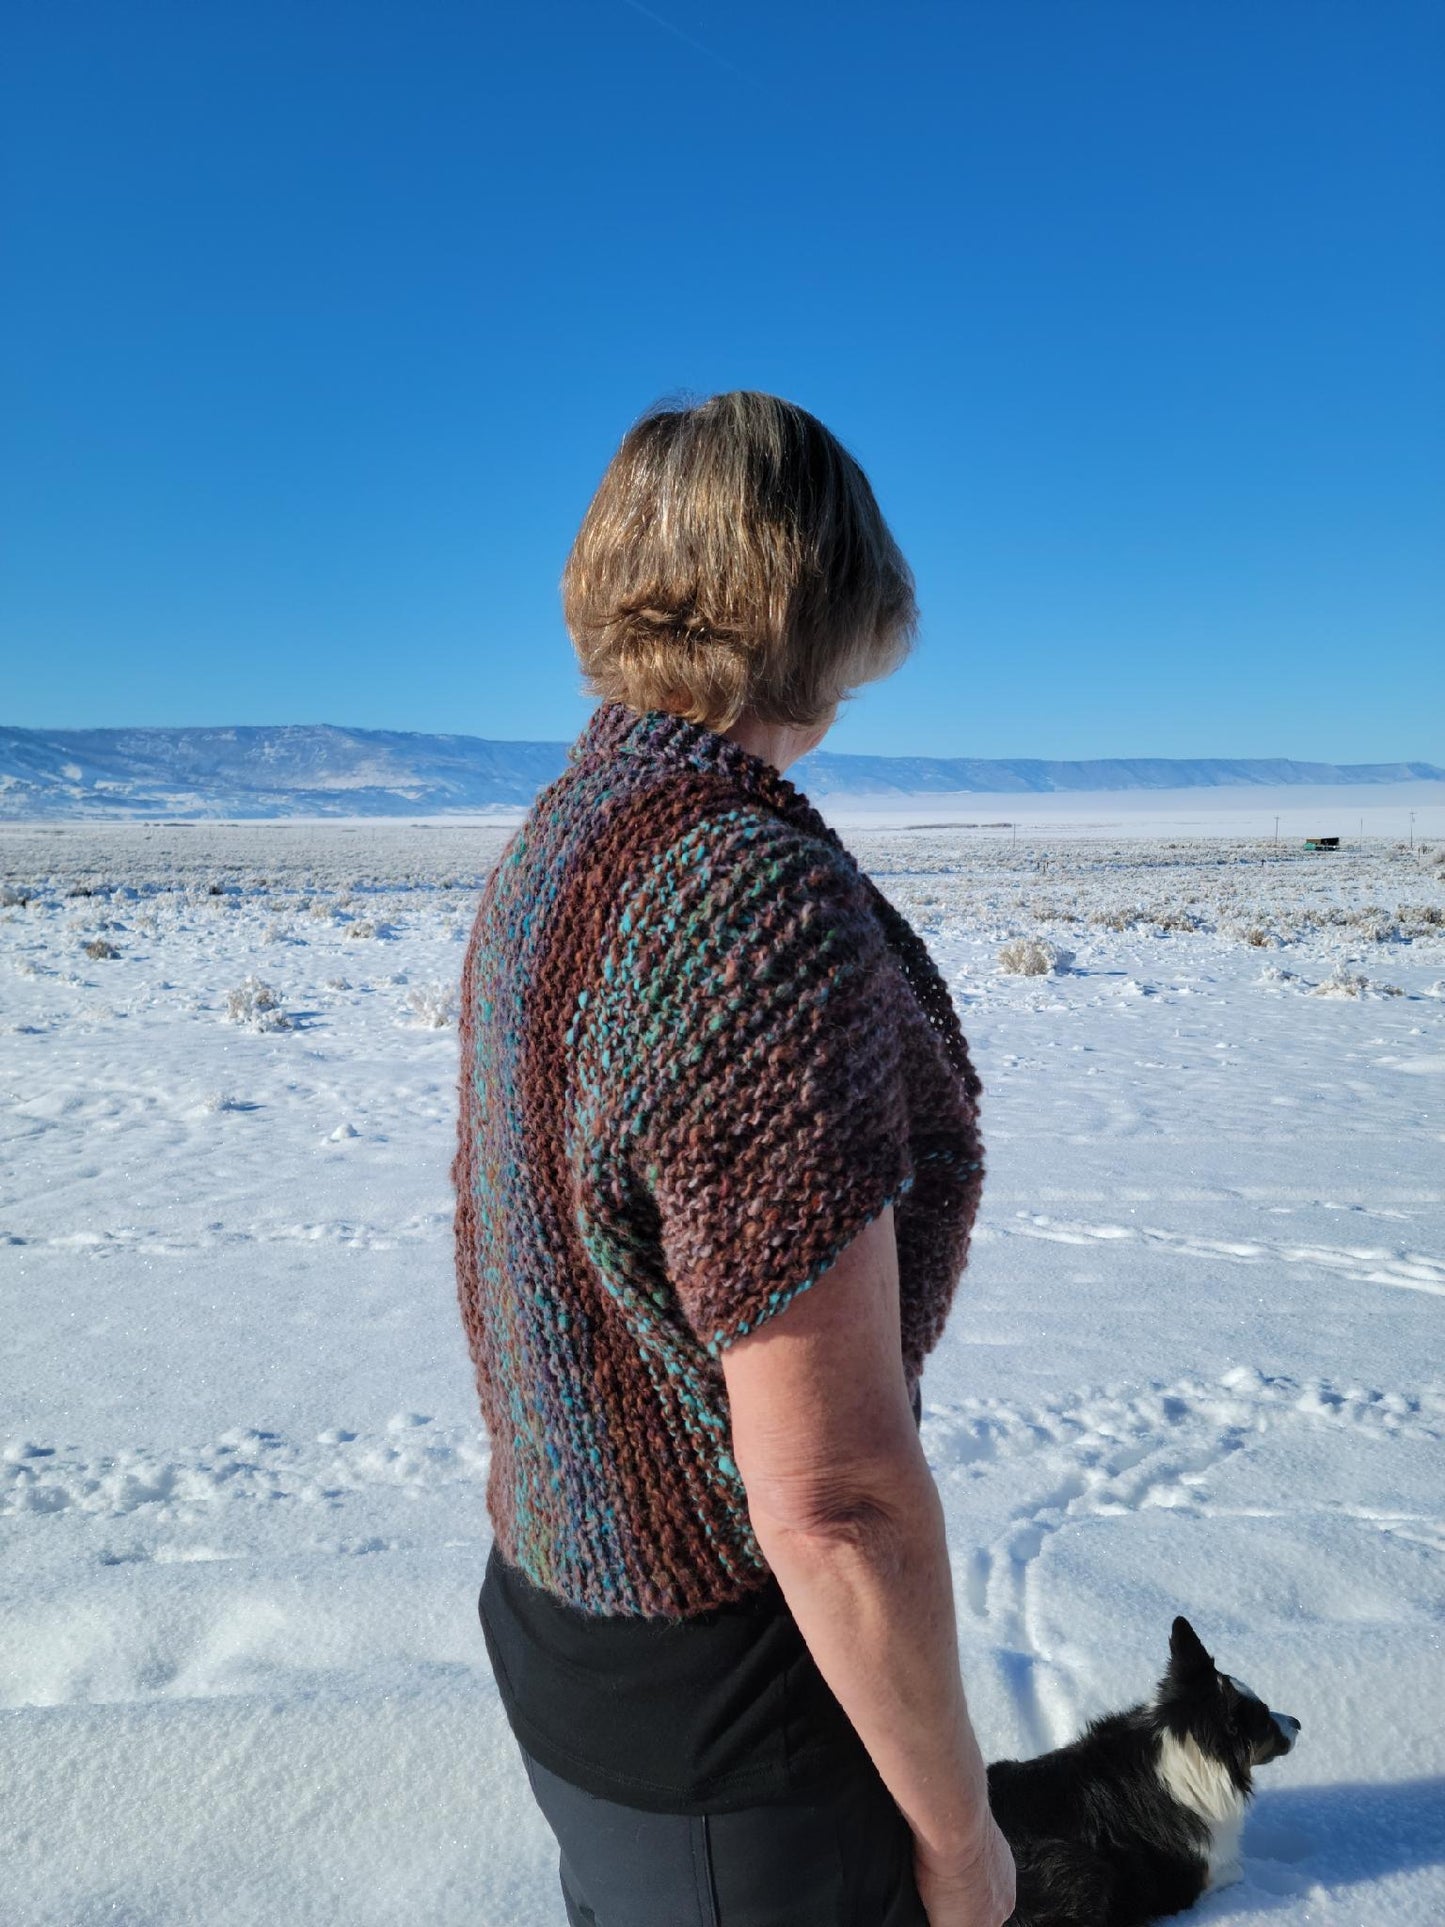 Wild and Wooly Shrug Knitting Pattern